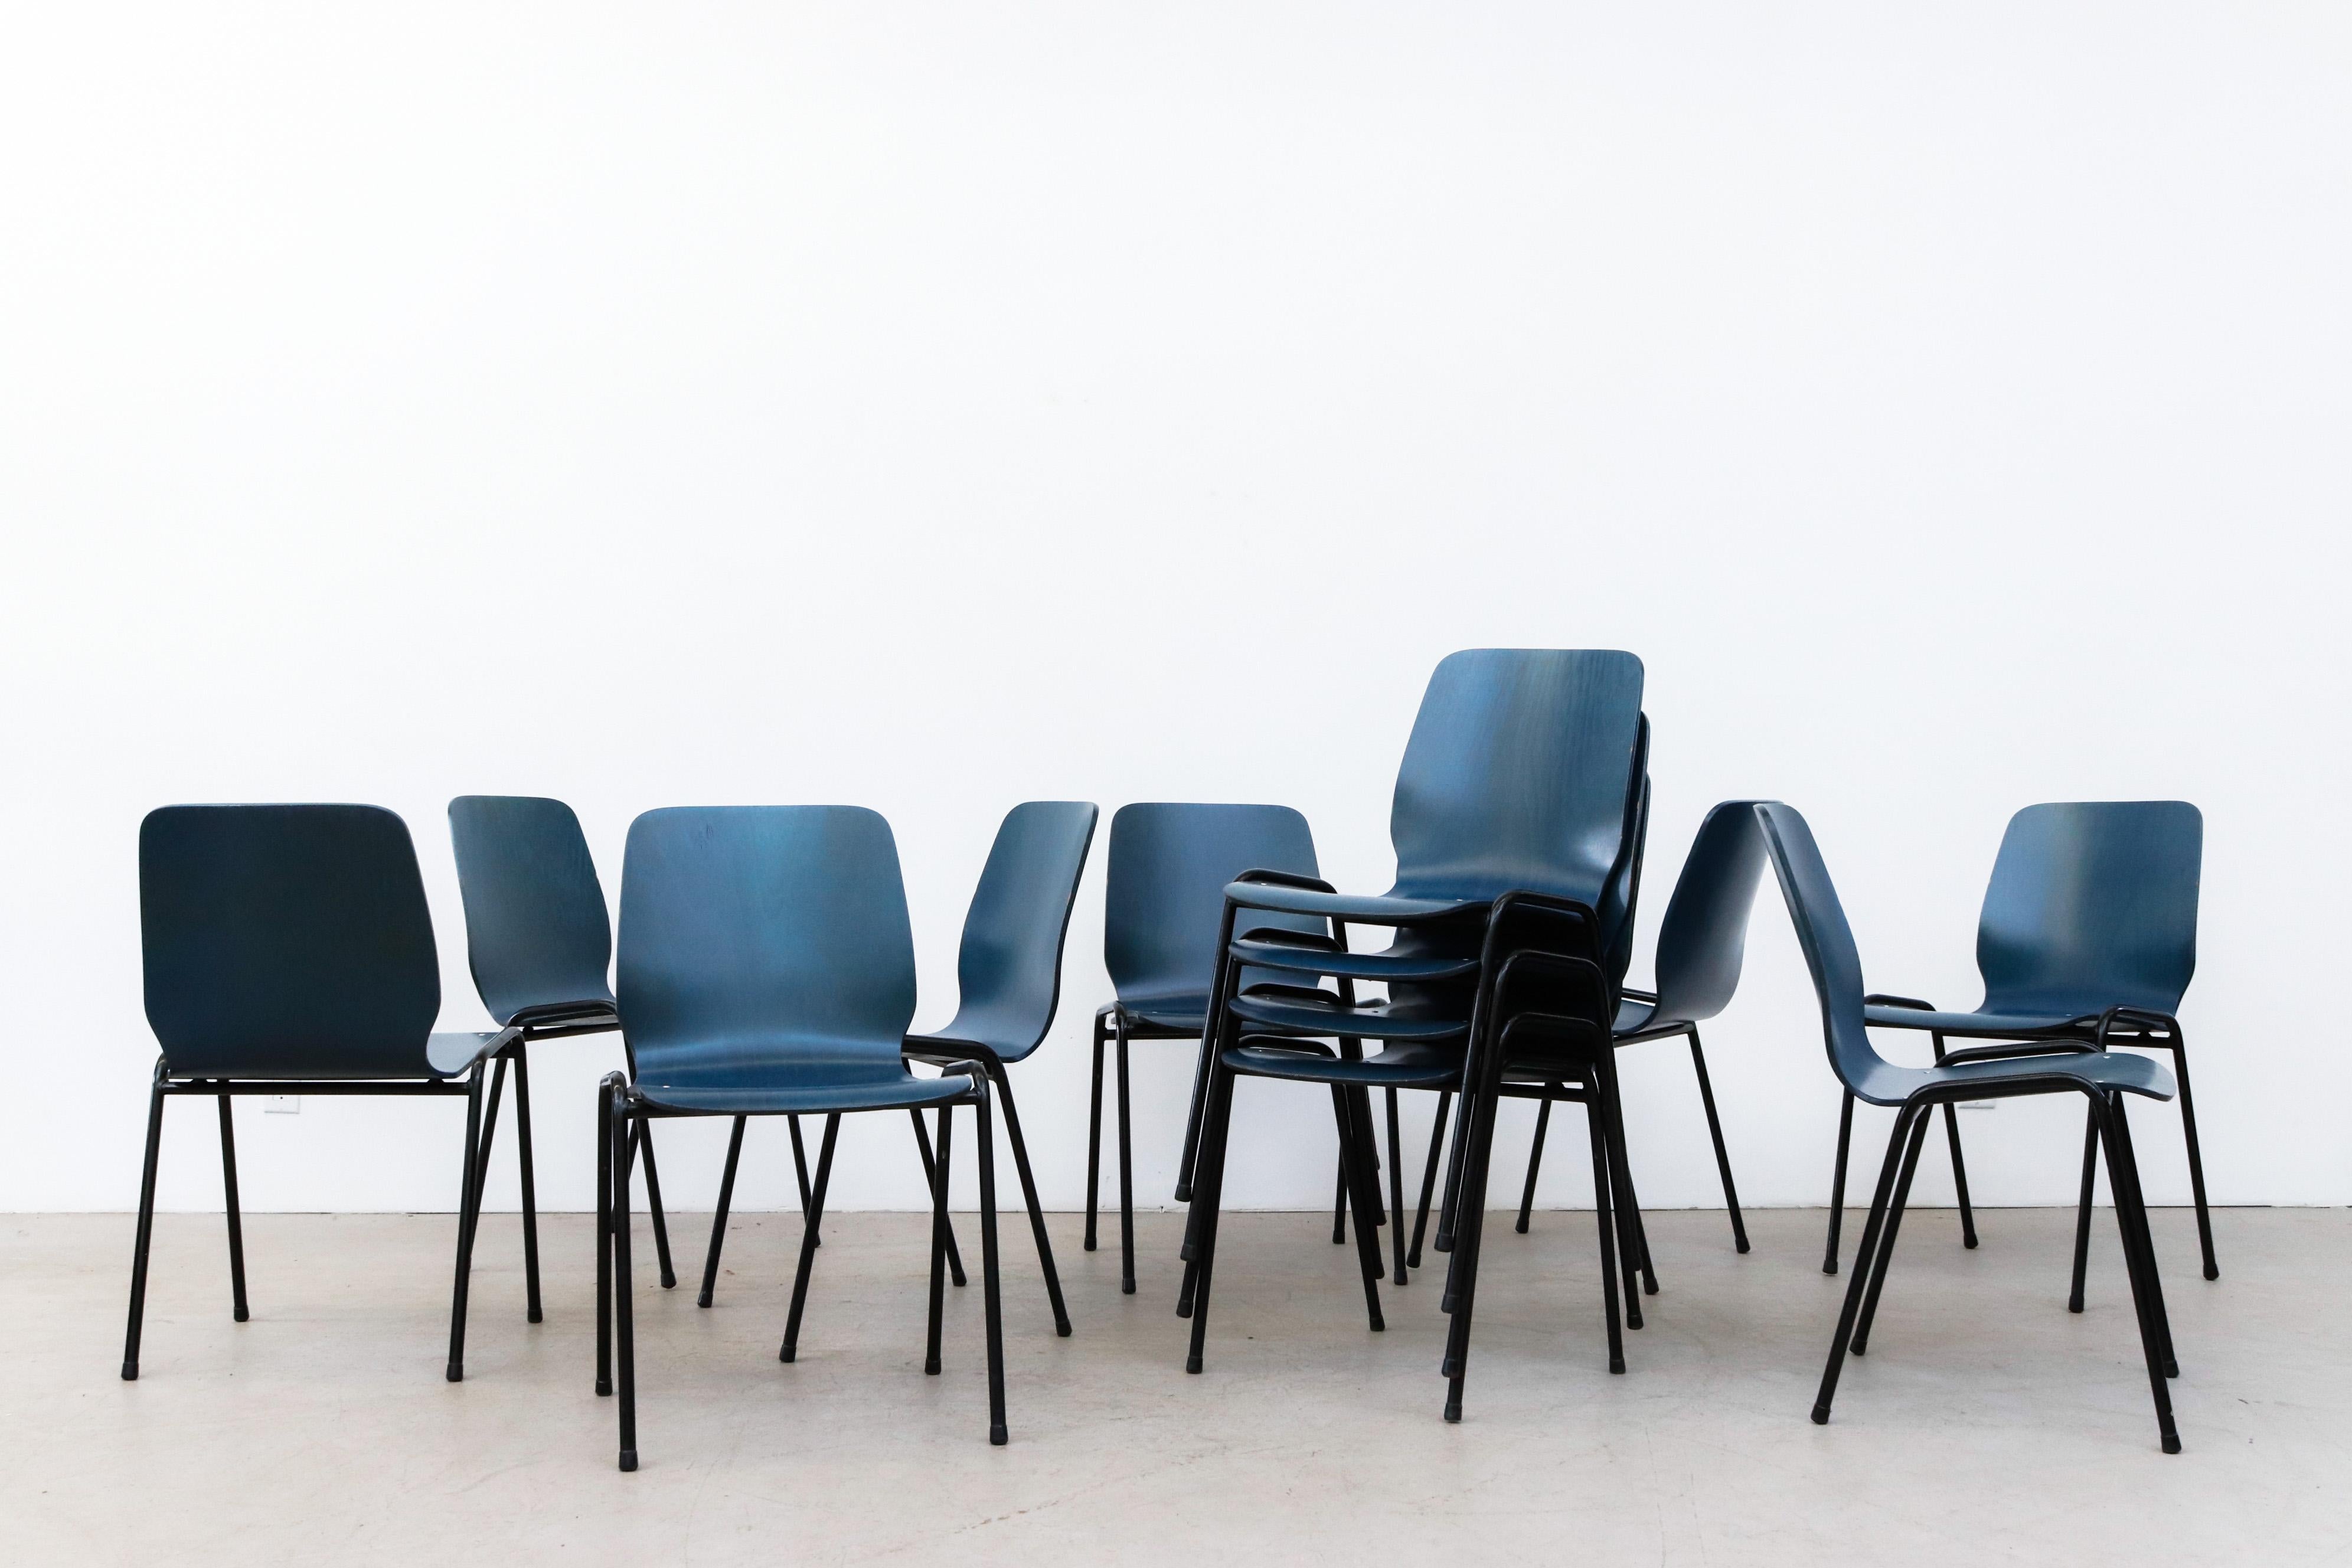 Set of 12 Fritz Hansen style blue stained bent plywood stacking chairs with black enameled tubular metal frames. In original condition withsome wear and visible chipping. Wear is consistent with their age and use. Green stained ansen Style wingback